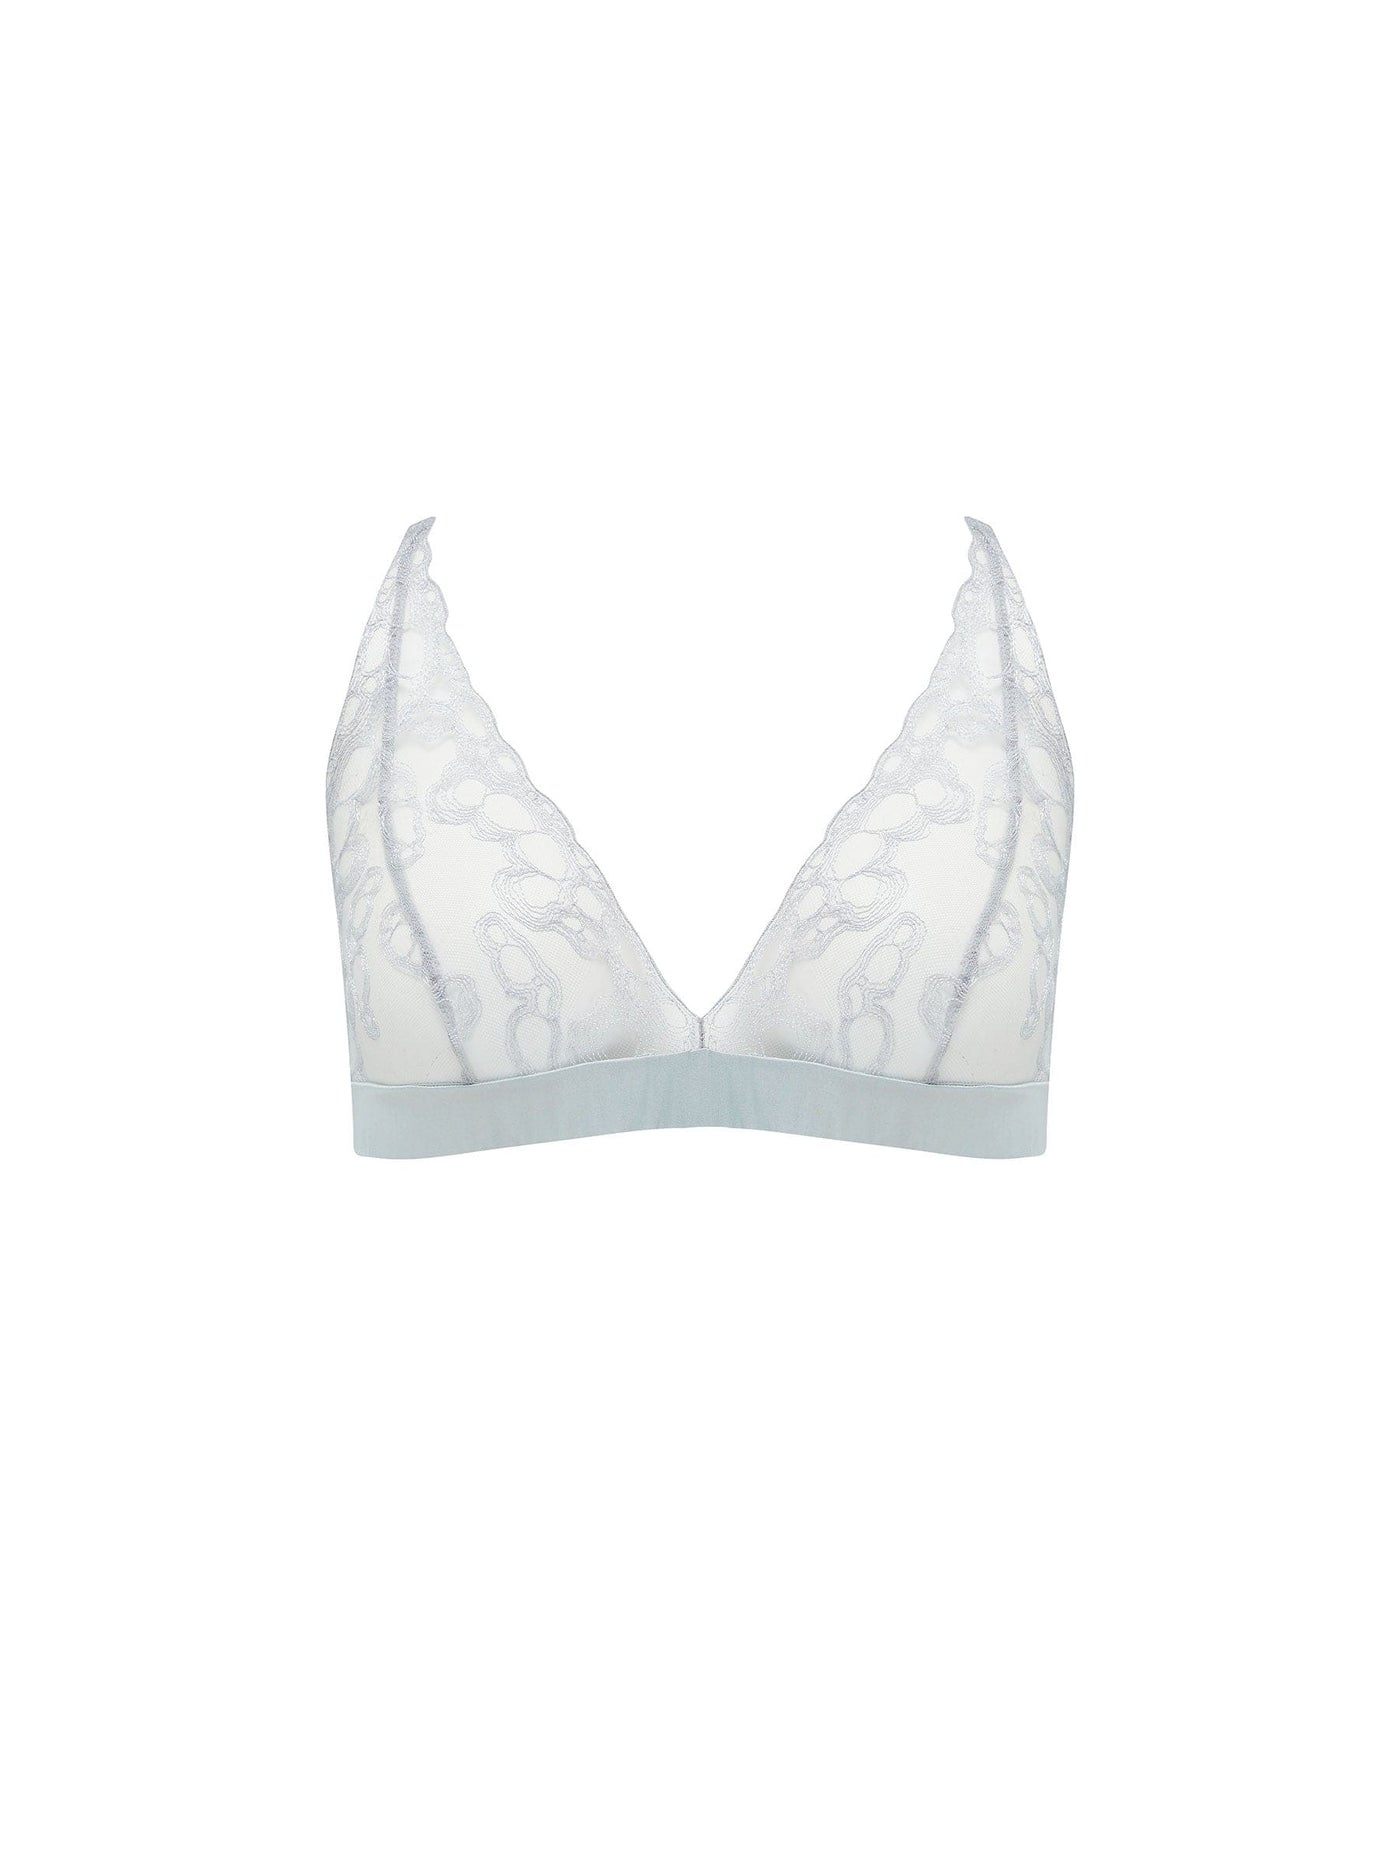 Front of luxury bralette from the Sigrid collection.